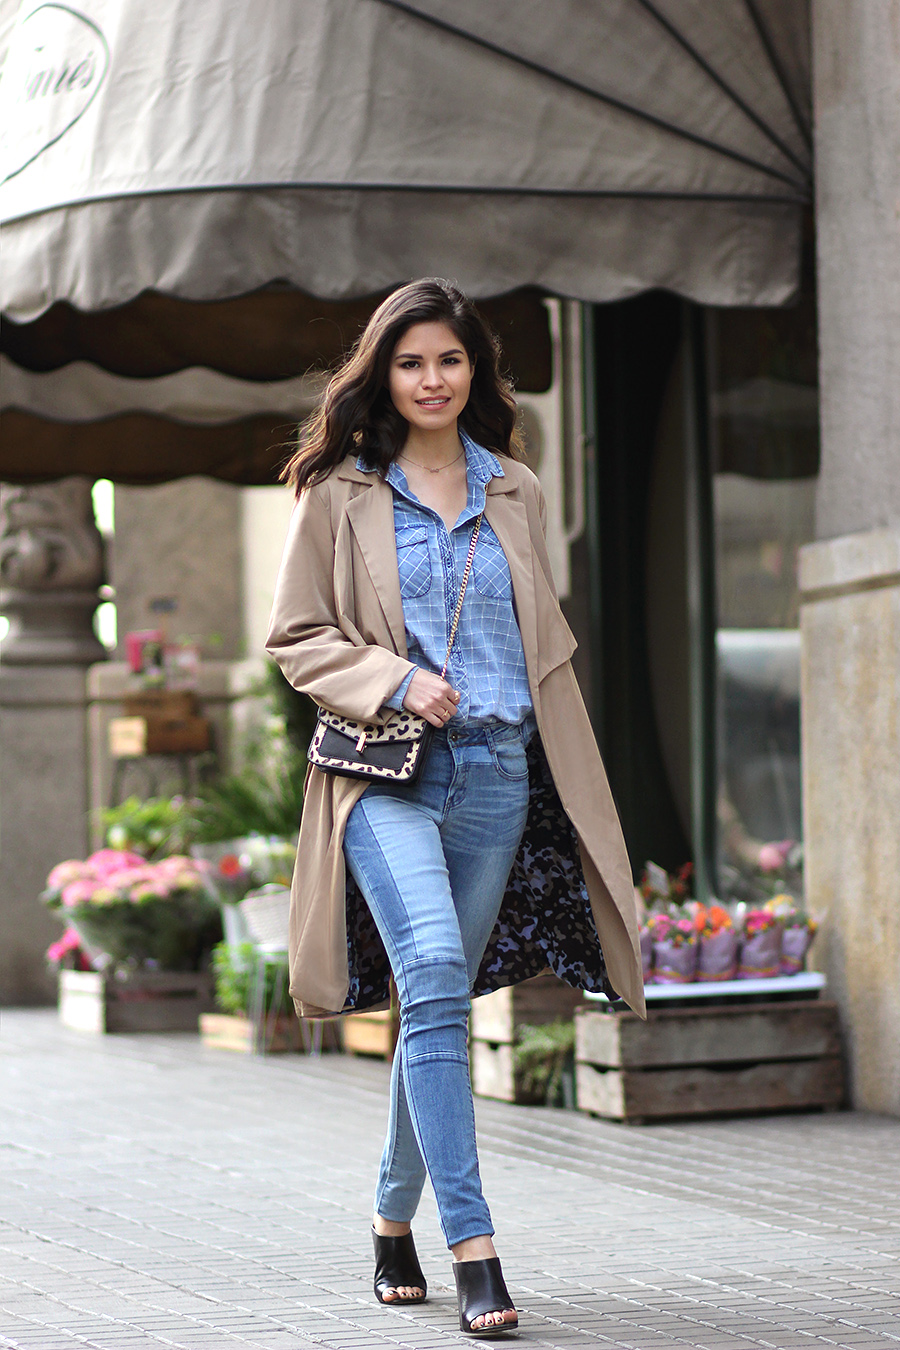 The model in double denim skinny jeans with mules and coat.